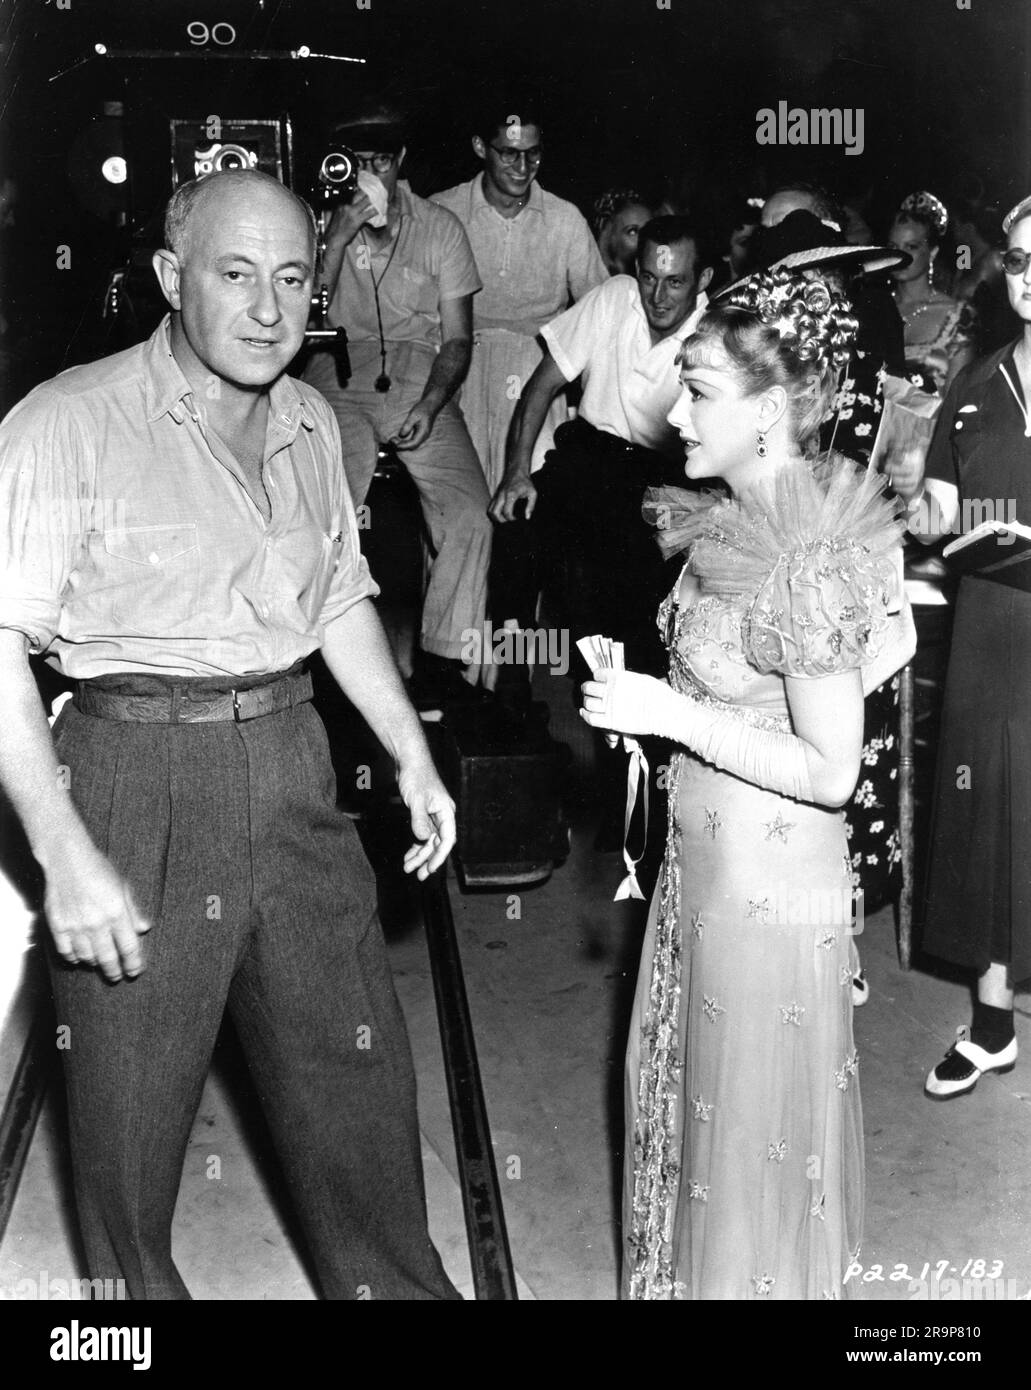 CECIL B. DeMILLE and Hungarian actress FRANCISKA GAAL on set candid with Movie Crew during filming of THE BUCCANEER 1938 director CECIL B. DeMILLE novel Lyle Saxon Paramount Pictures Stock Photo